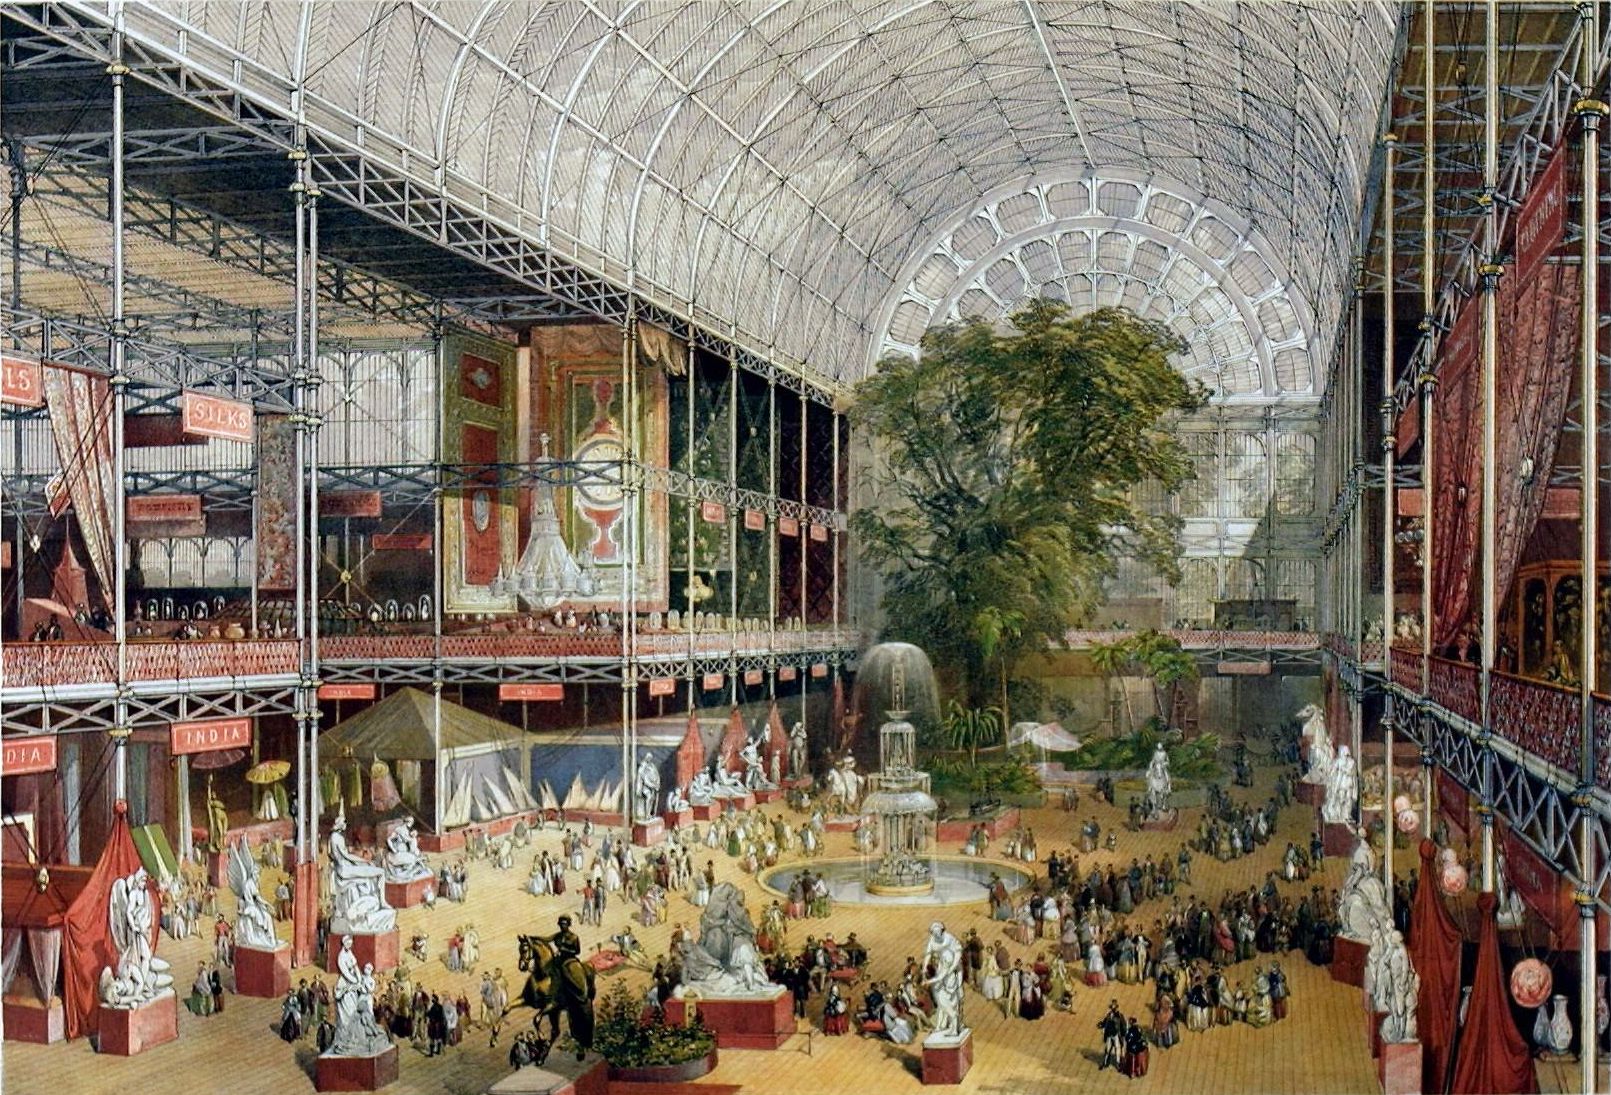 Illustration of the Great Exhibition of 1851.